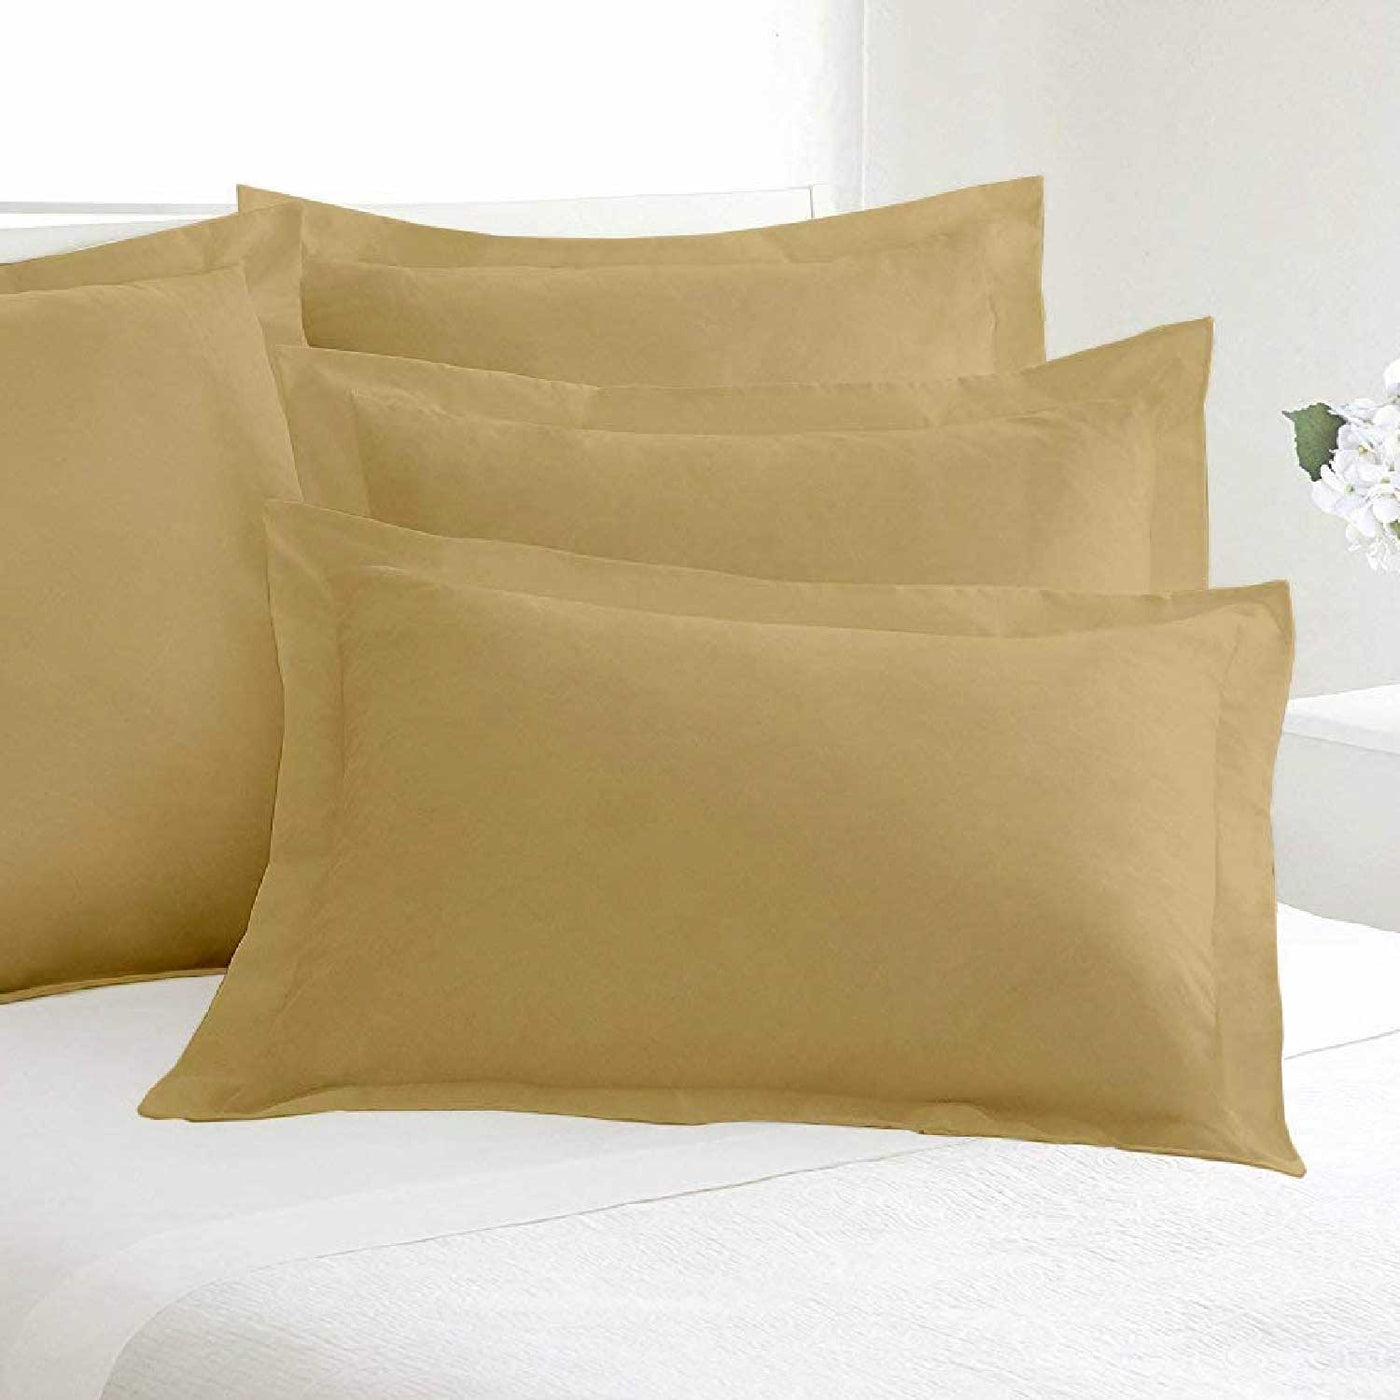 Set of 2 Solid Pillow Shams 100% Egyptian Cotton 600 Thread Count